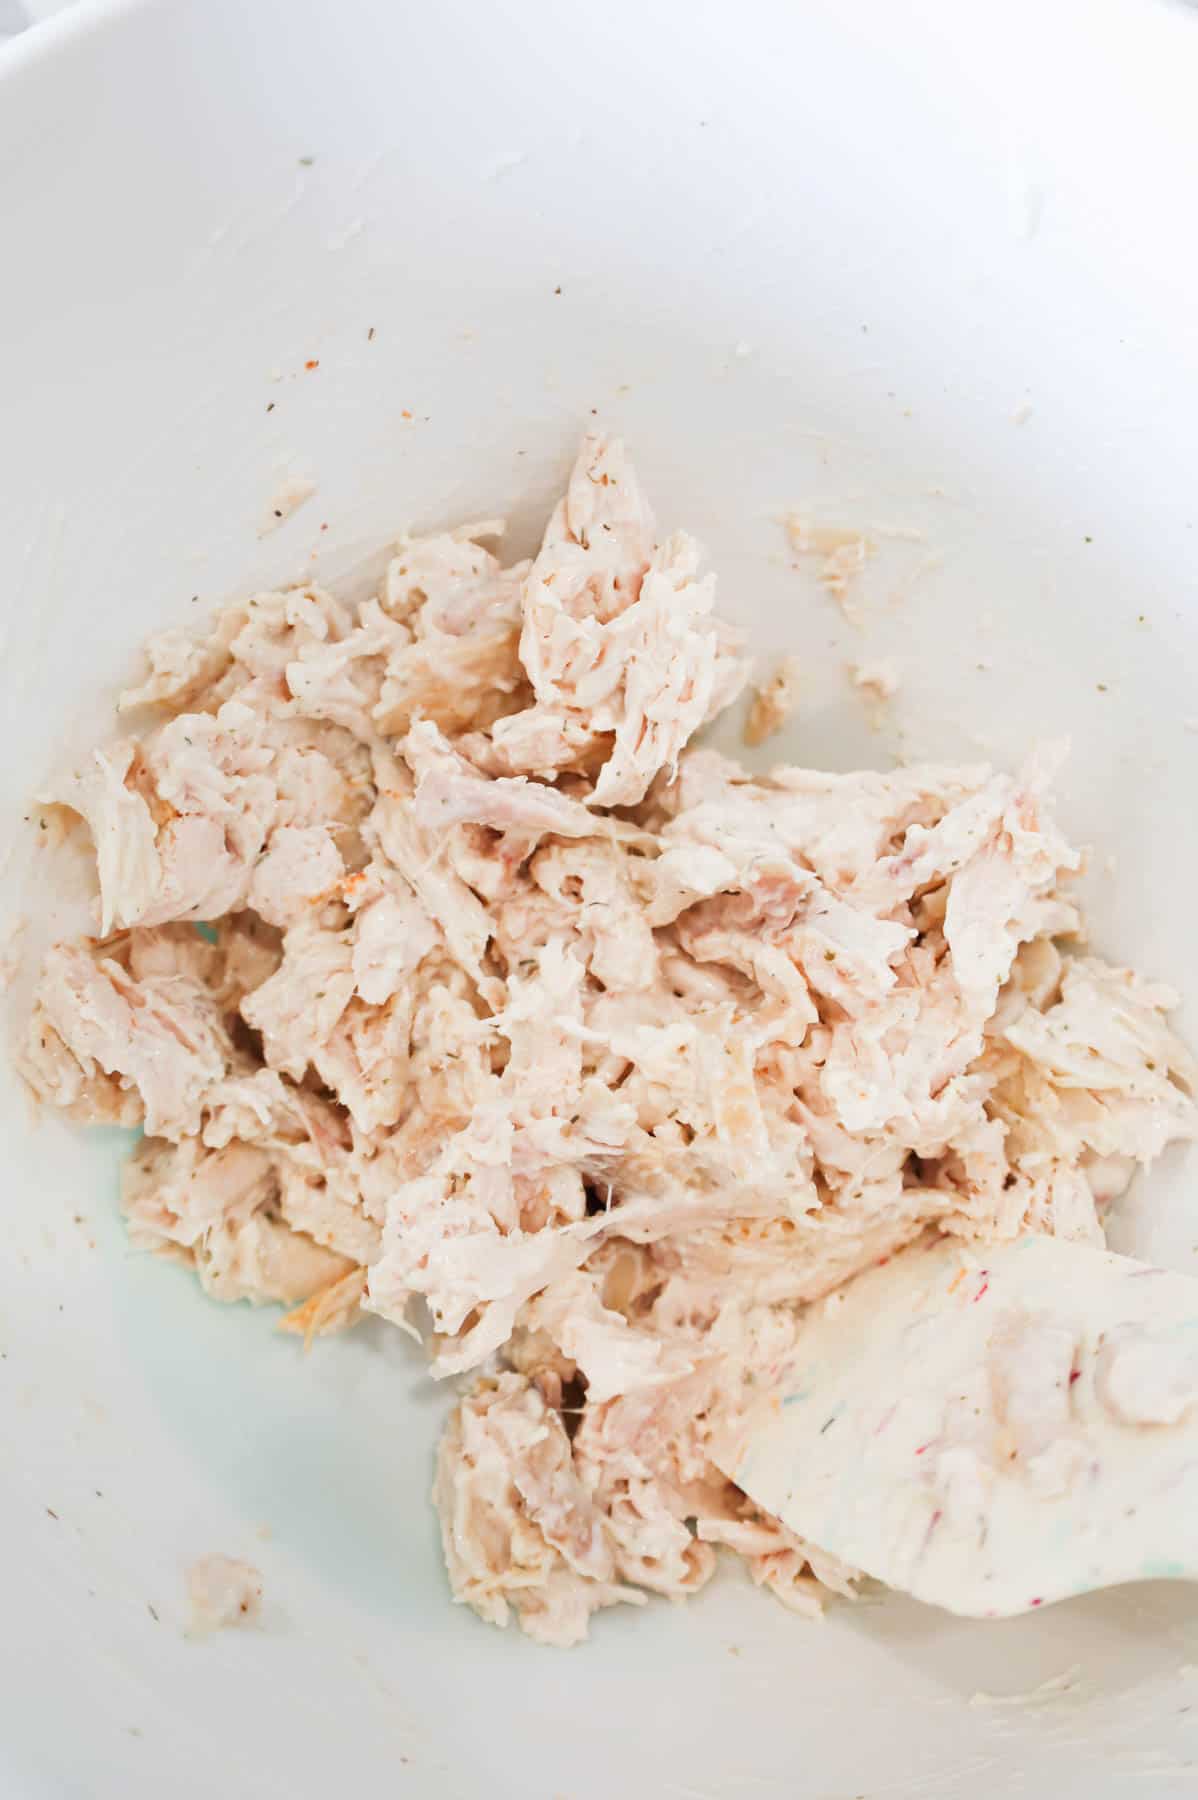 shredded chicken coated with ranch dressing in a mixing bowl